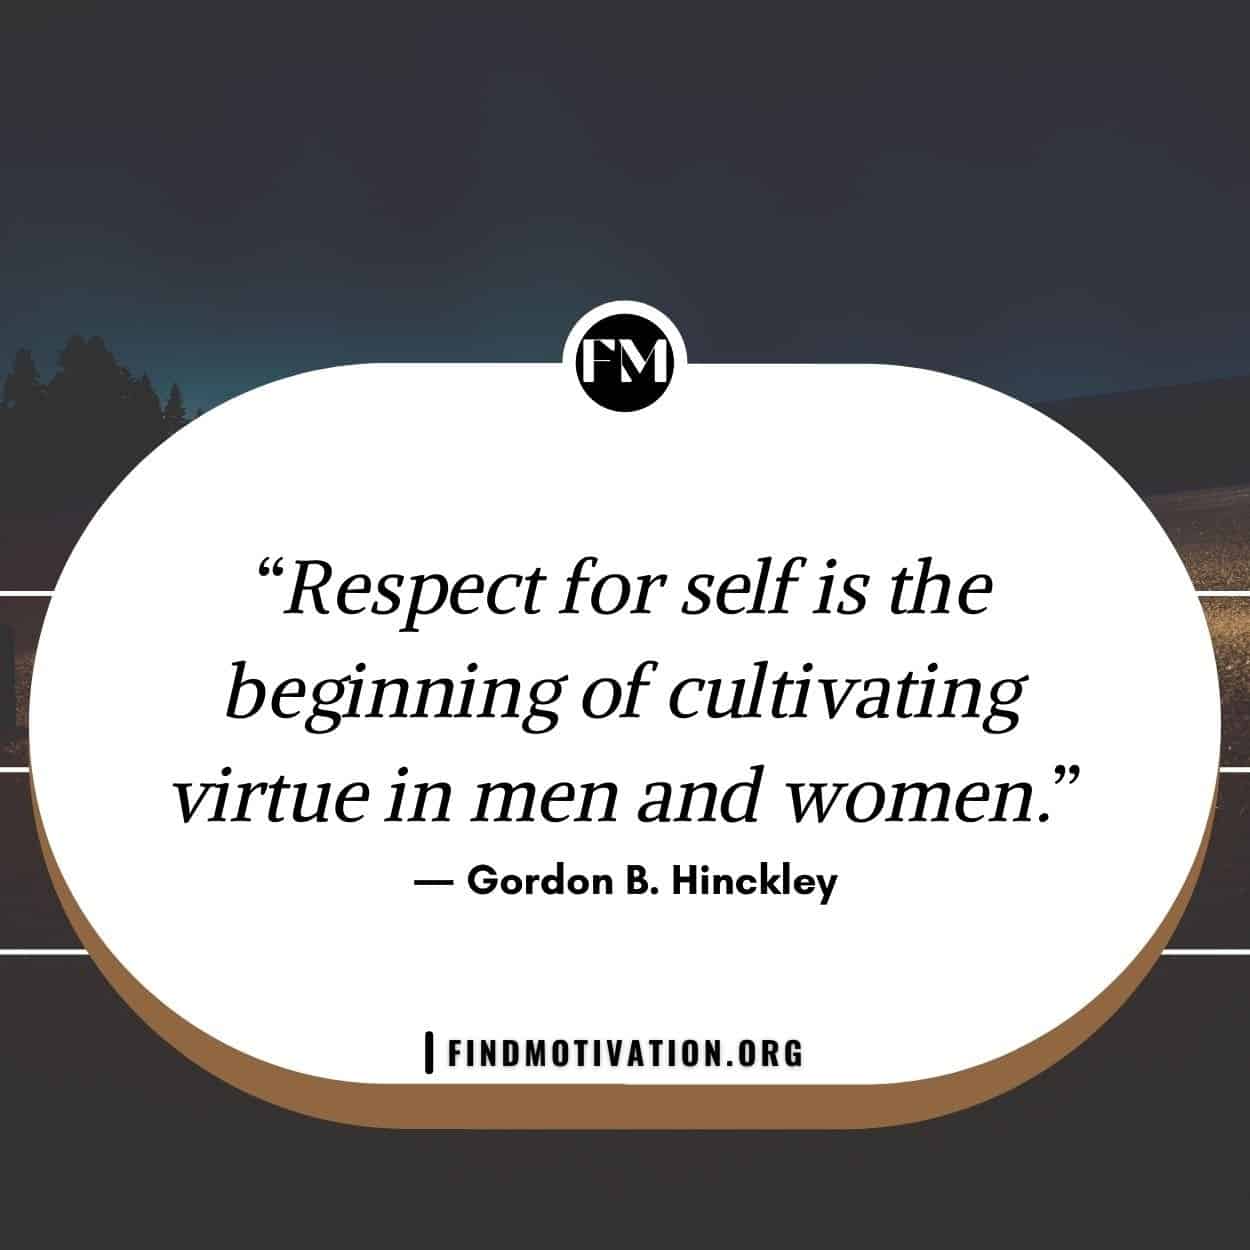 Self-respect quotes to know how to create self-respect for yourself